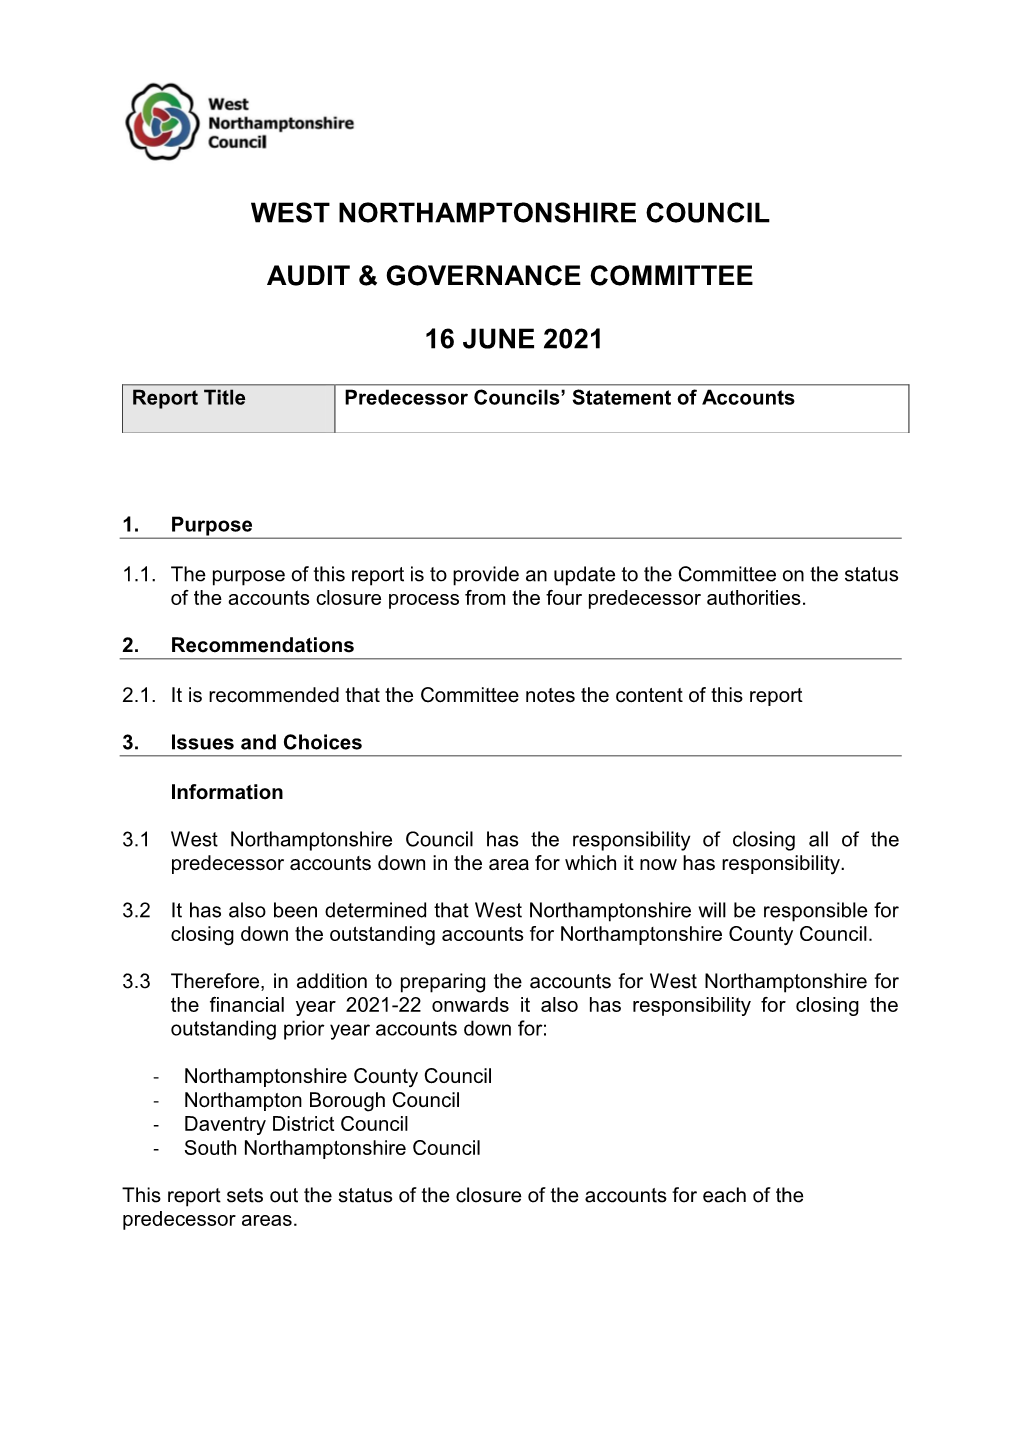 West Northamptonshire Council Audit & Governance Committee 16 June 2021